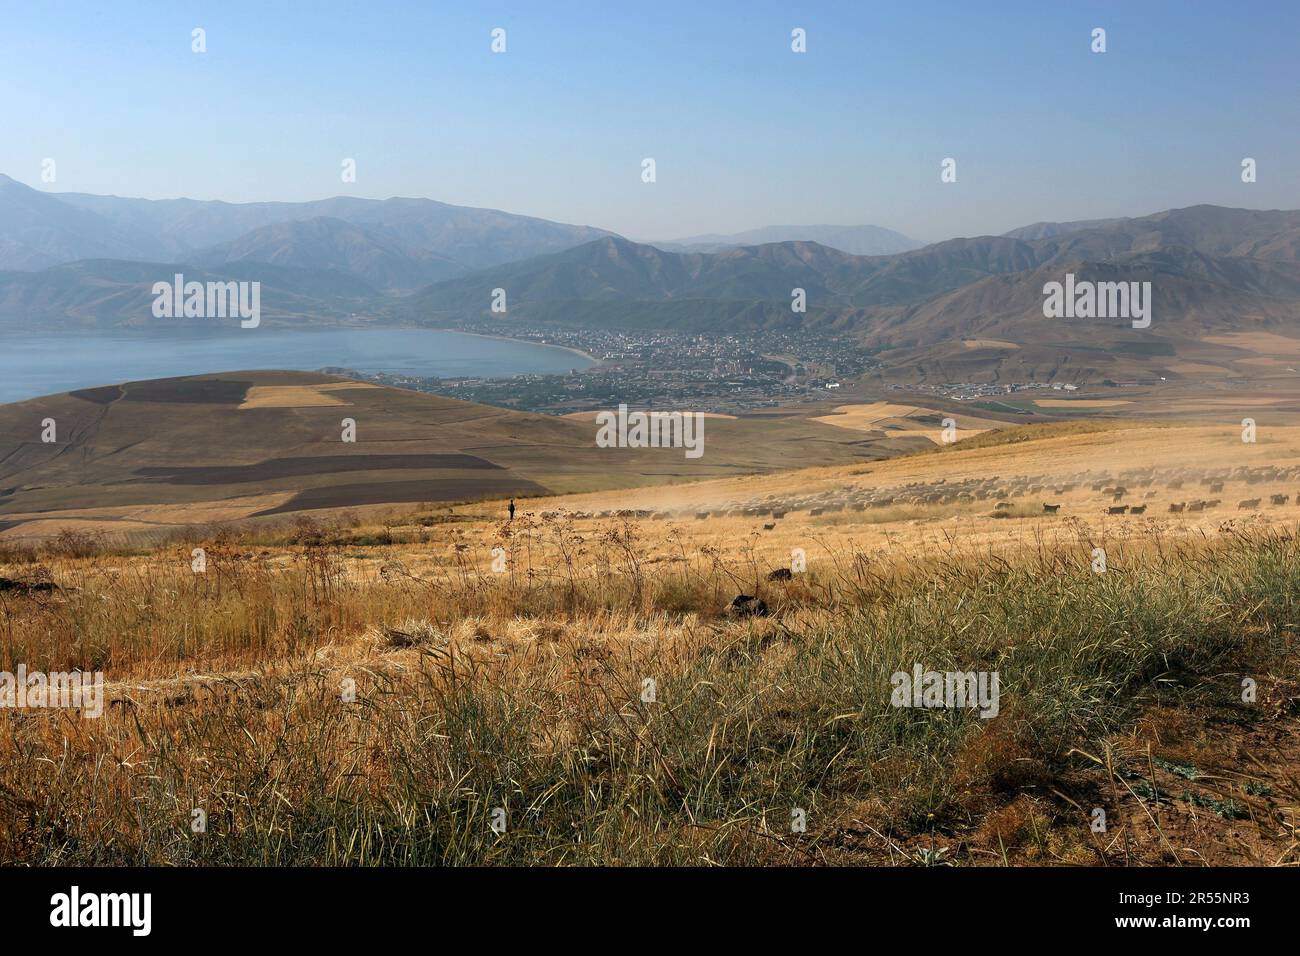 A farmer moves a flock of sheep and goats from a paddock of stubble on a hillside overlooking the town of Tatvan. Tatvan sits on the shore of Lake Van Stock Photo